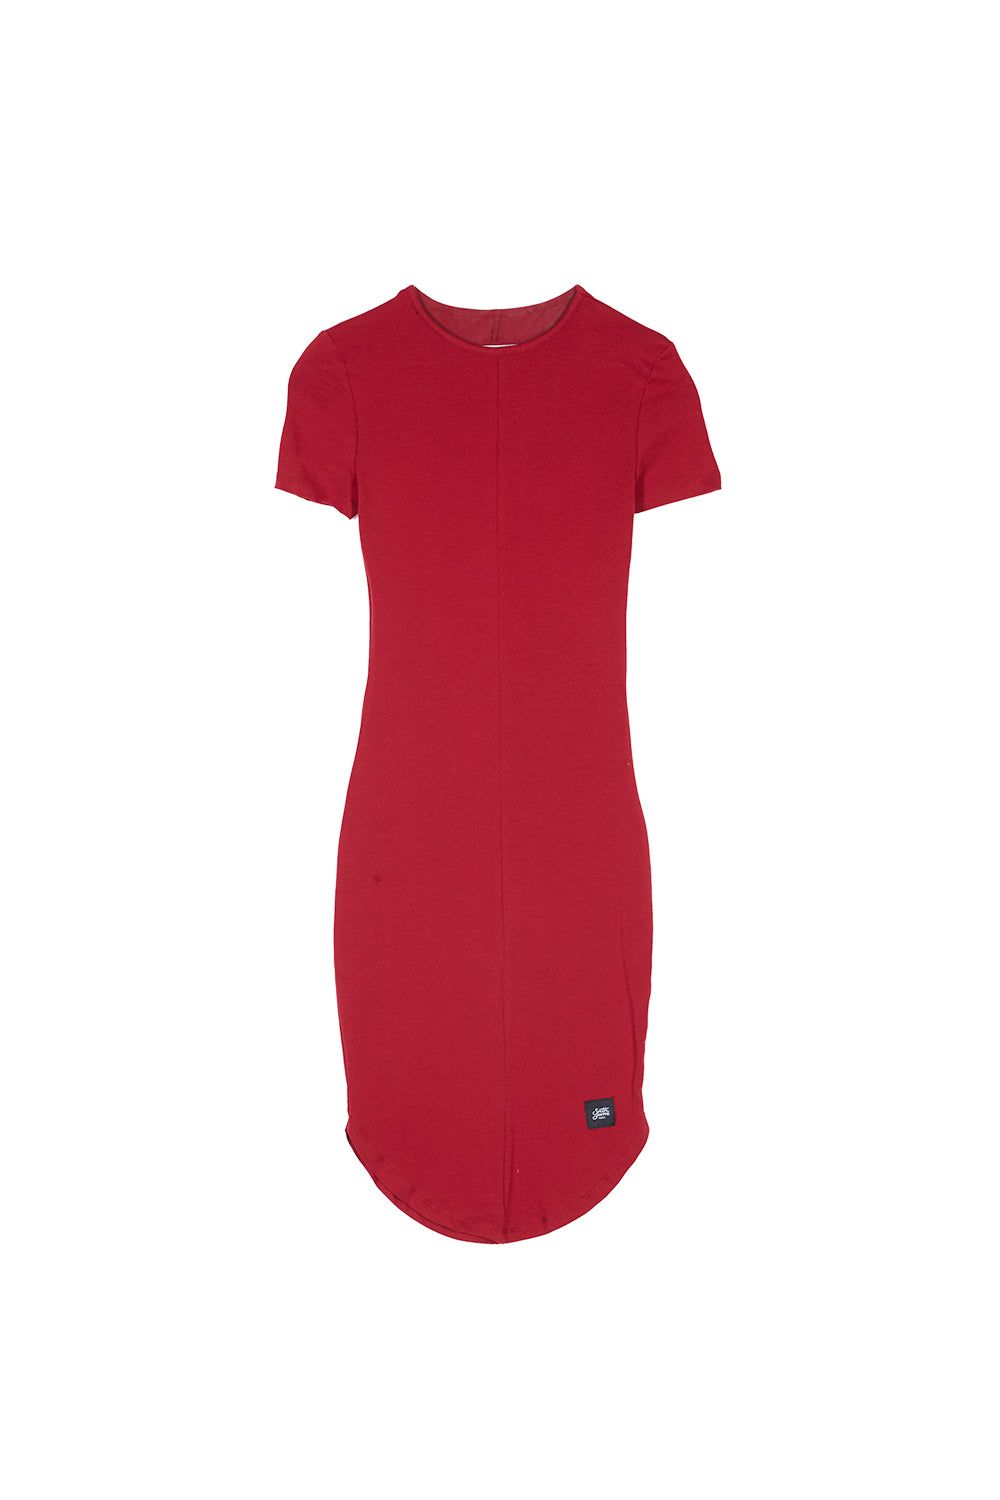 Sixth June - Robe courte rouge